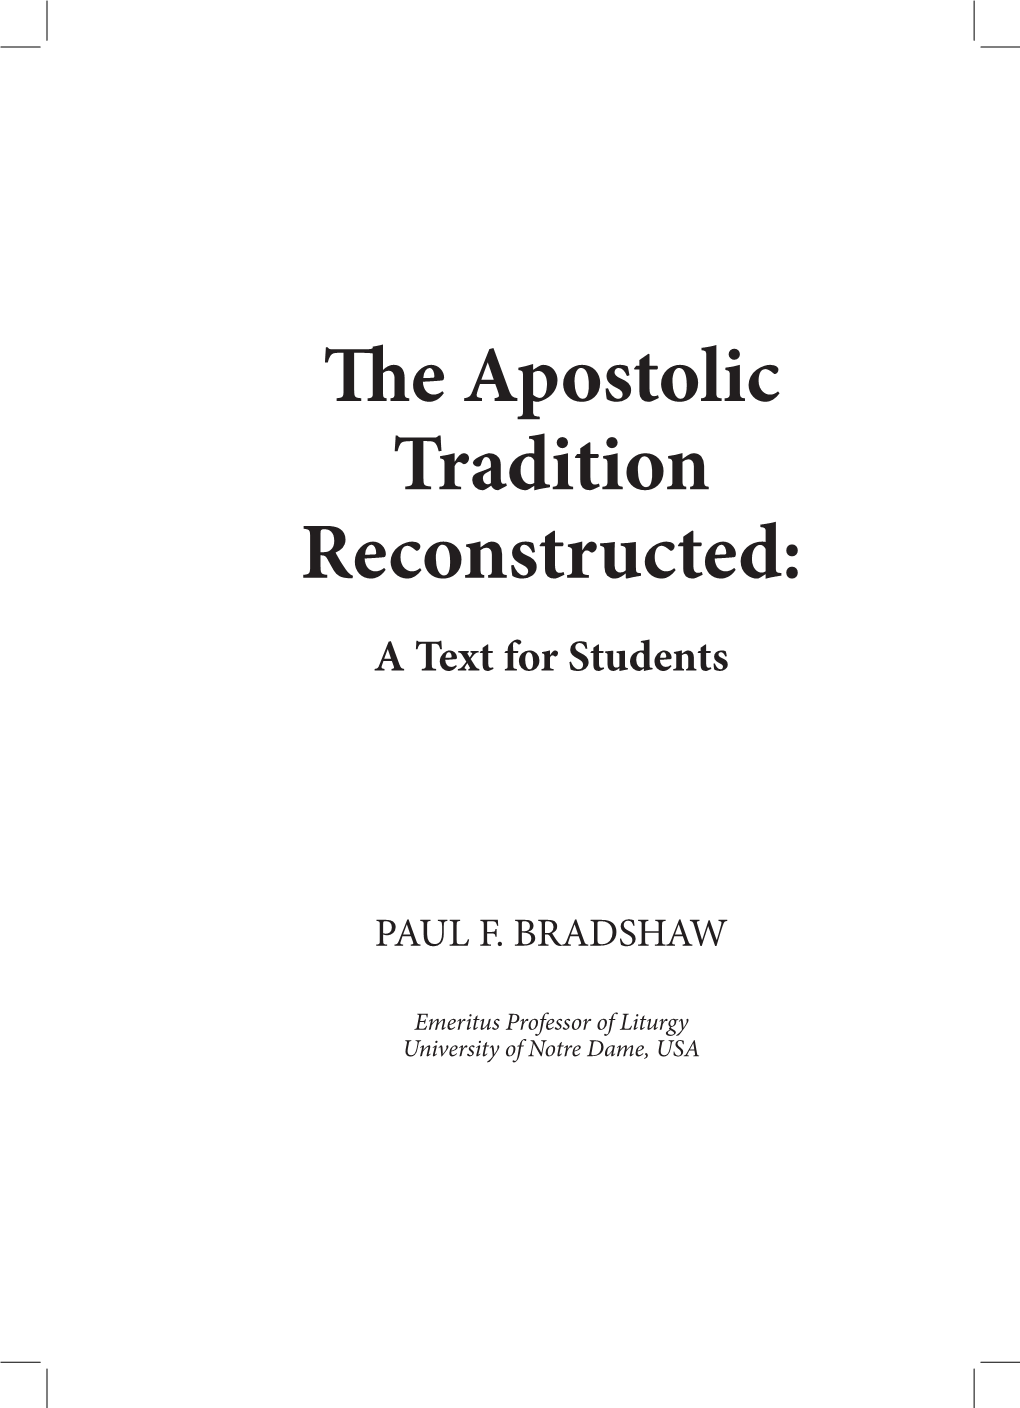 The Apostolic Tradition Reconstructed: a Text for Students